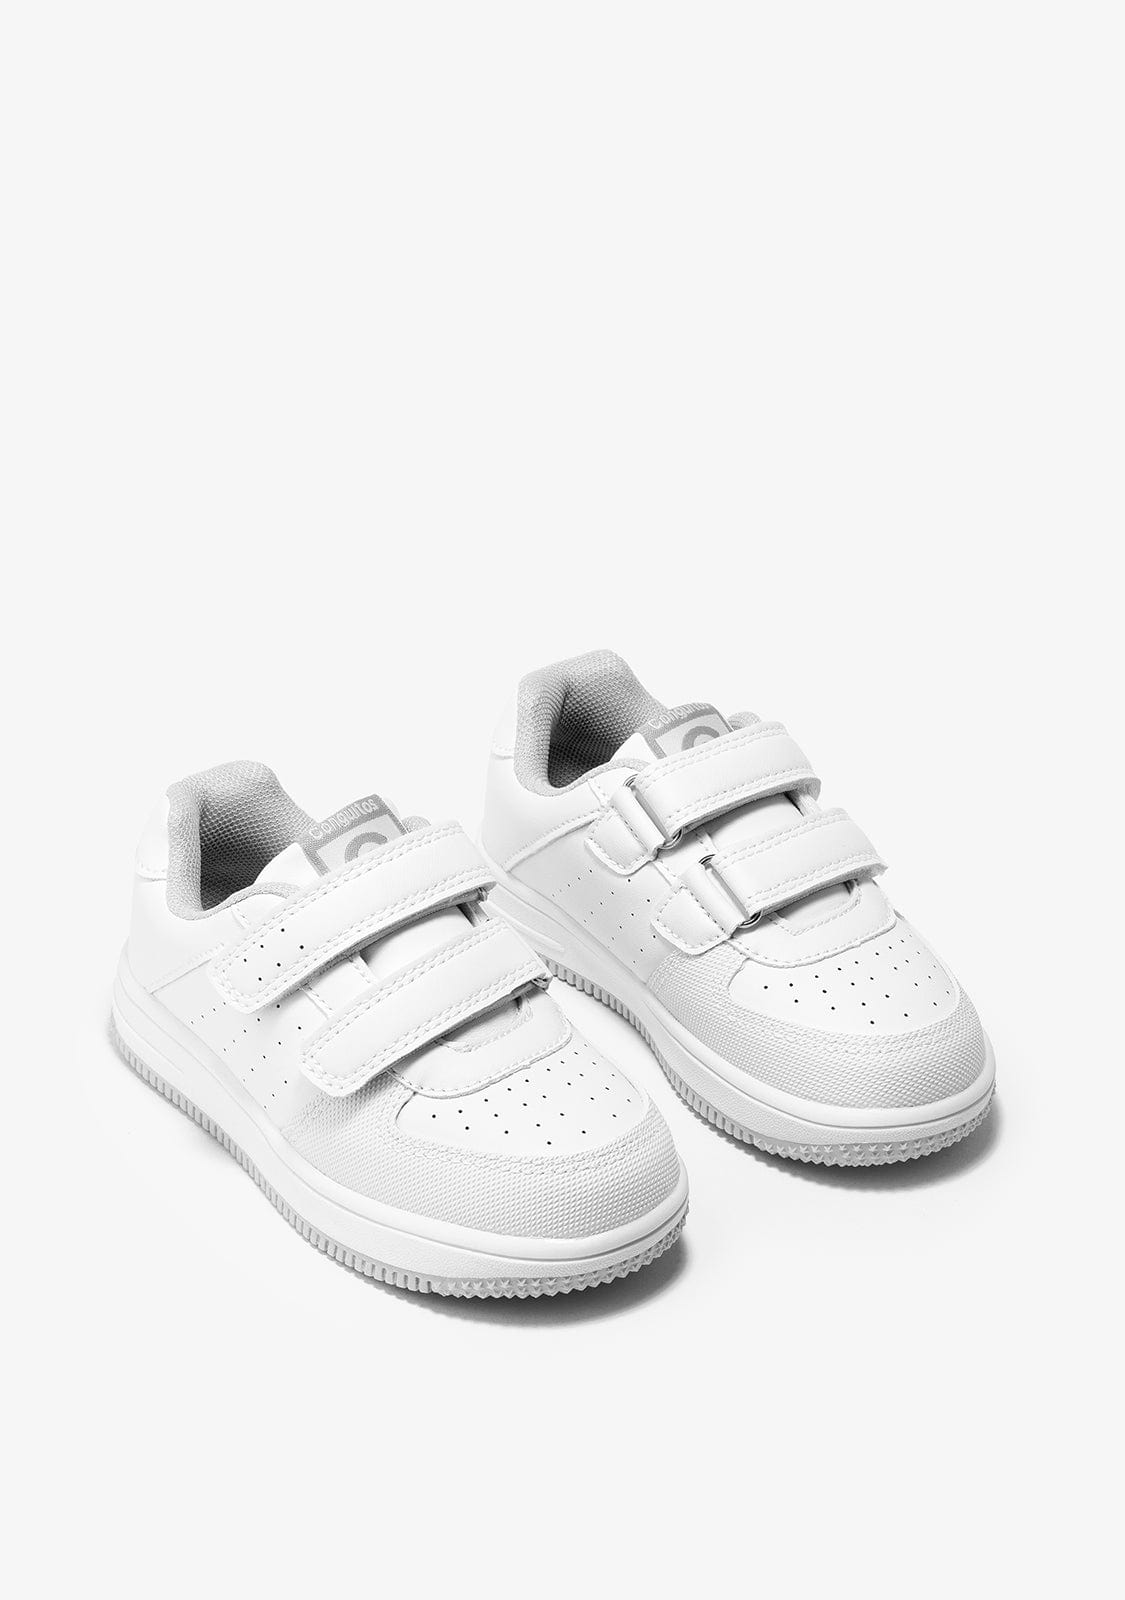 Conguitos Shoes Unisex White / Grey Trainers